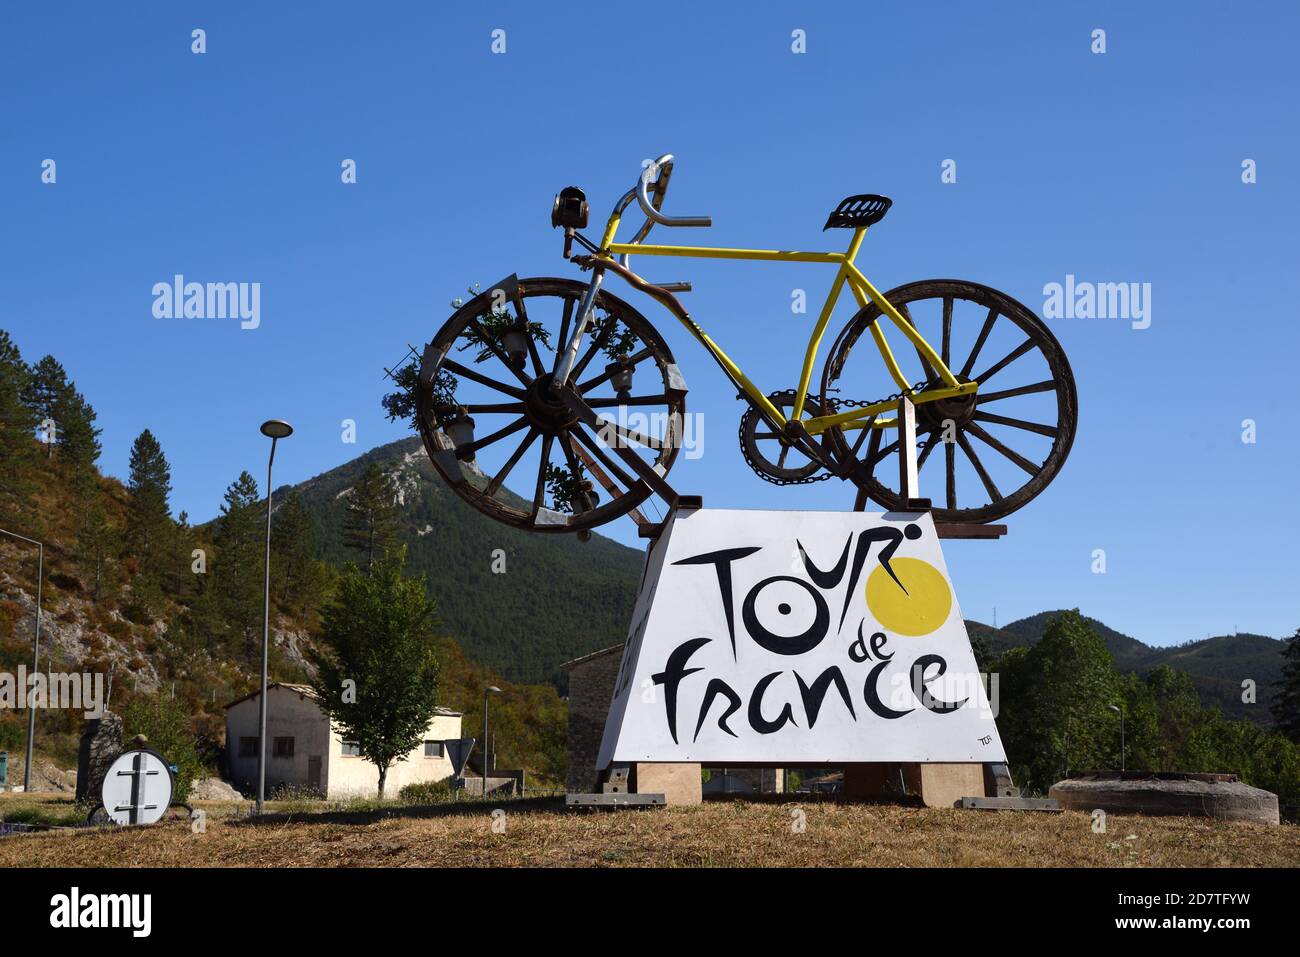 Roadside Advert for the Tour de France Cycle Race and Road Racing Bicycle Stock Photo